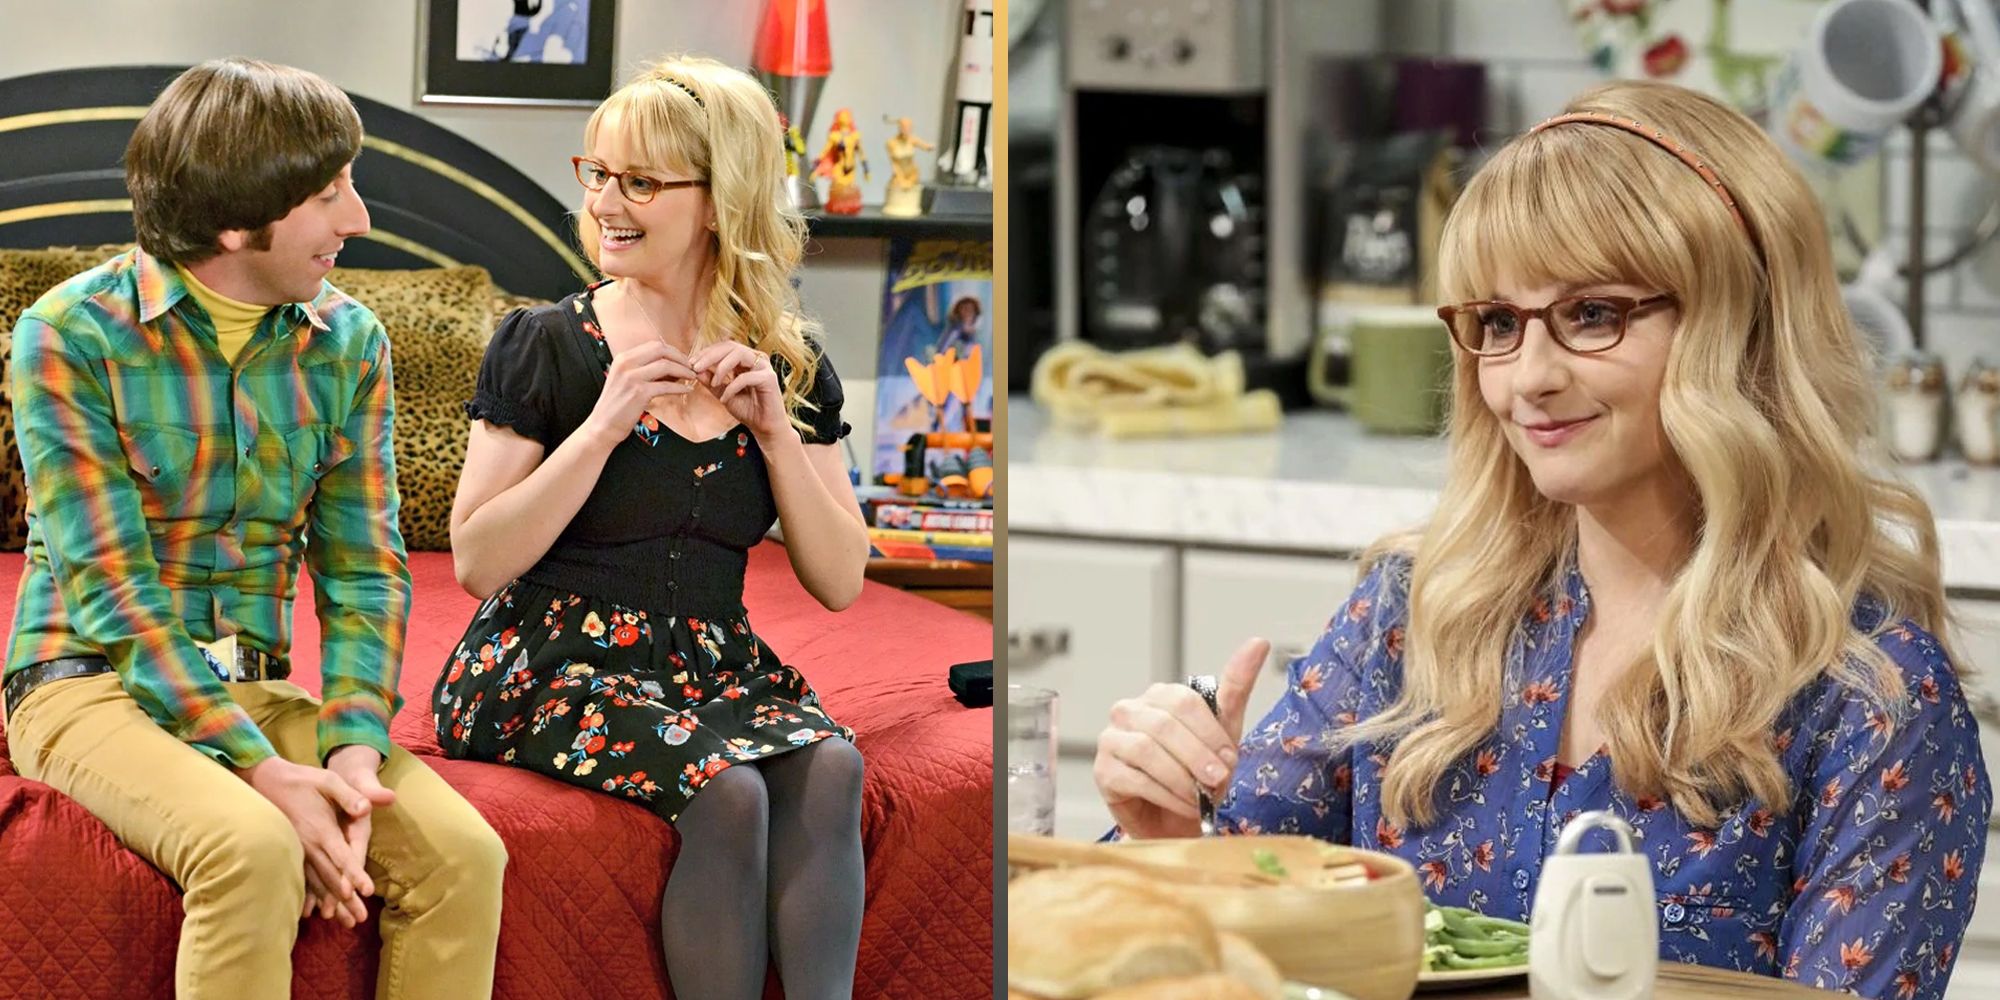 The Big Bang Theory 10 Quotes That Perfectly Sum Up Bernadette As A Character